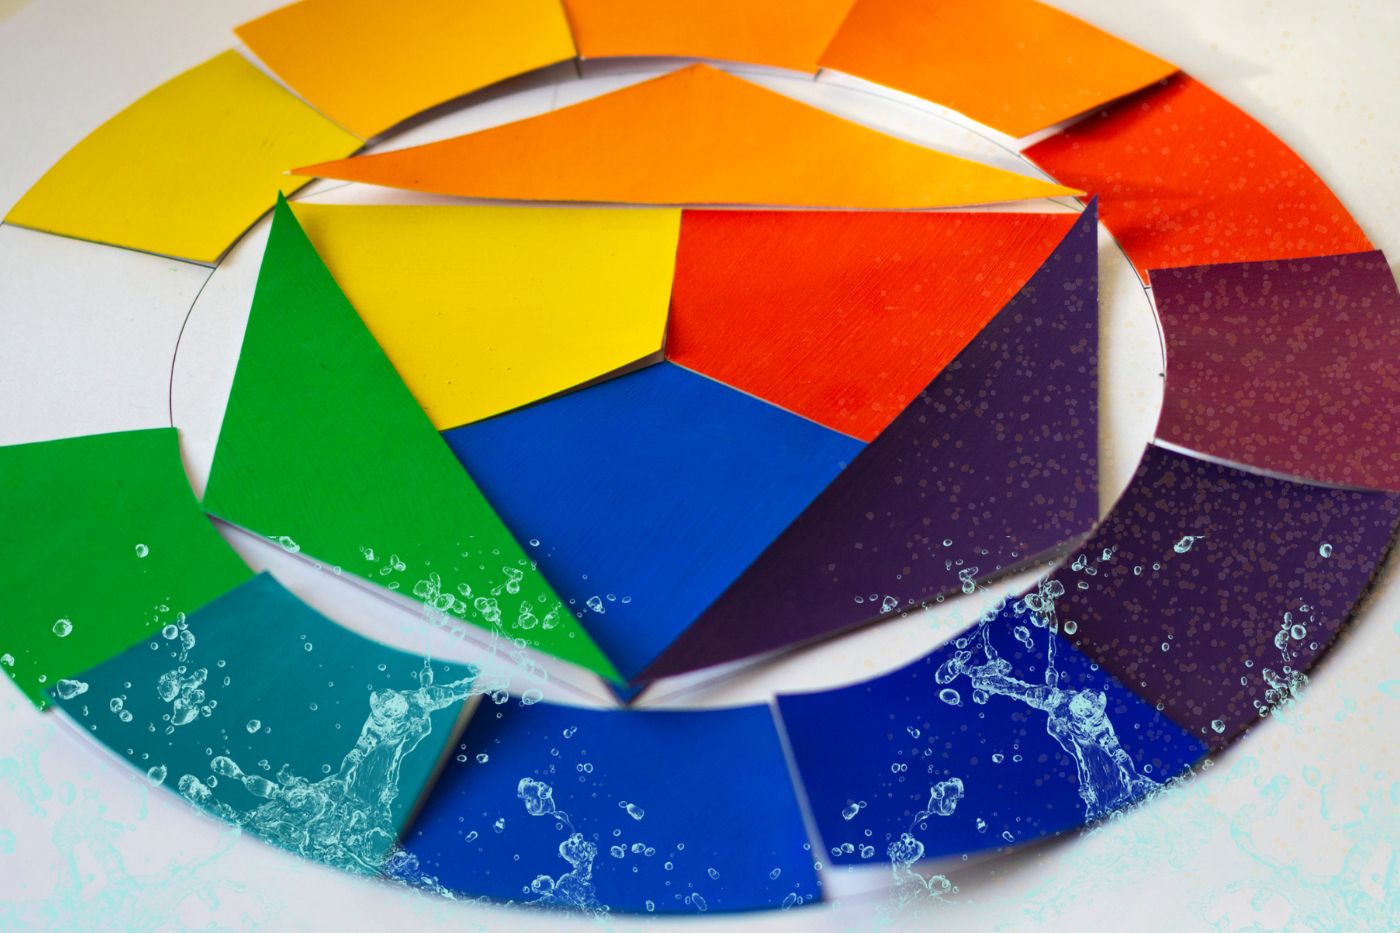 You are currently viewing Understanding the Color Wheel- 12 Different Color Schemes Used by Artists and Designers.